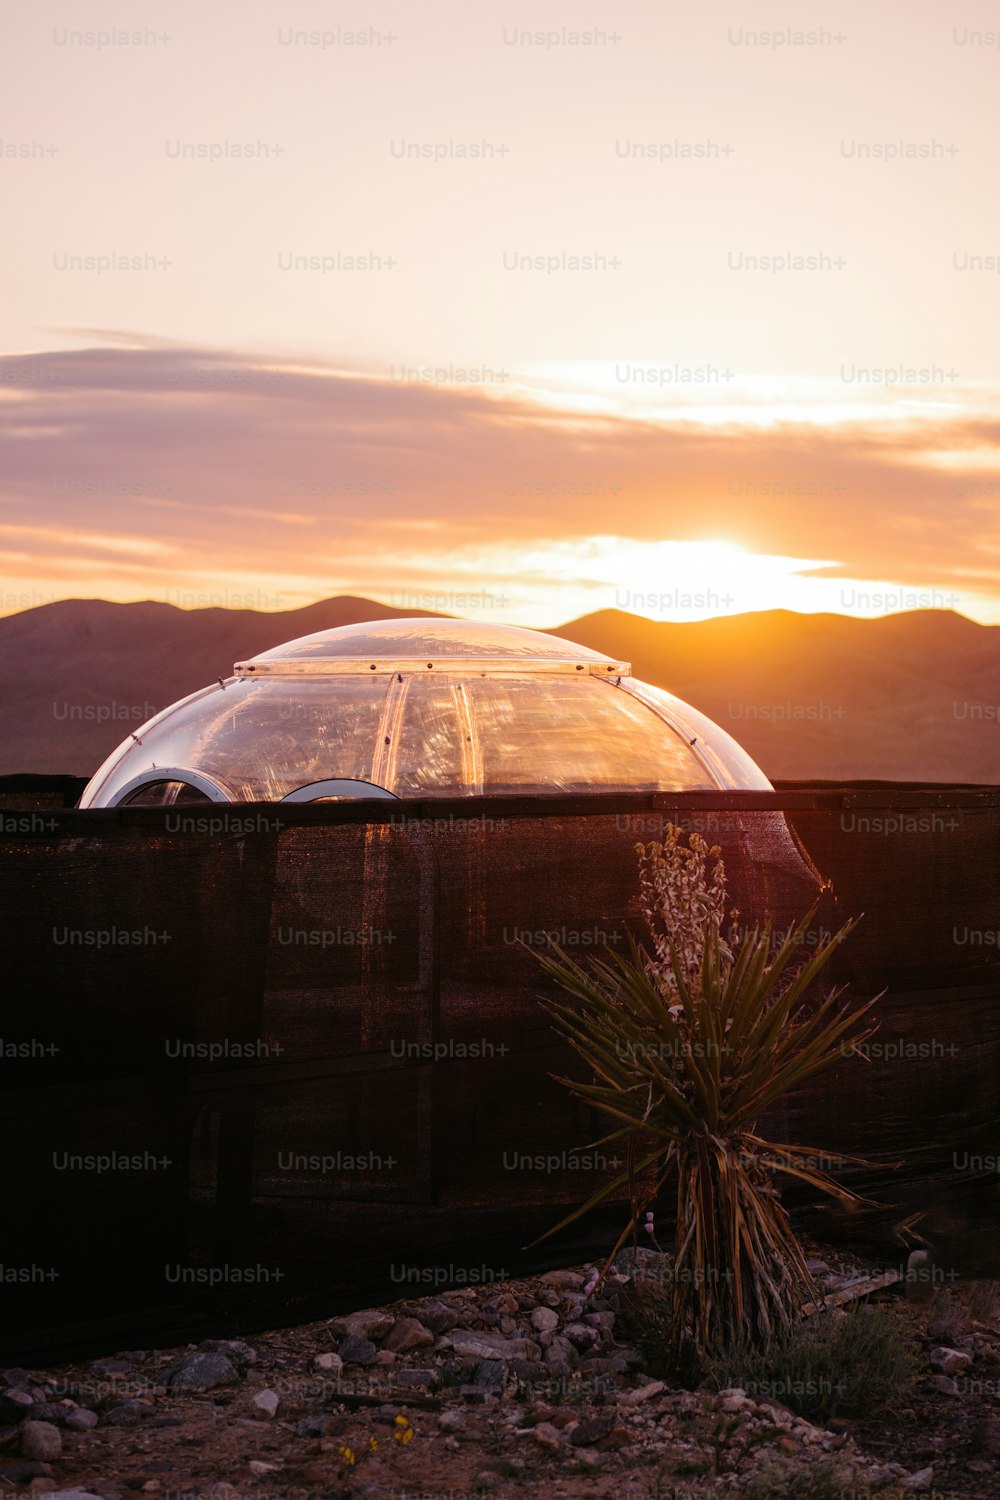 the sun is setting behind a dome structure